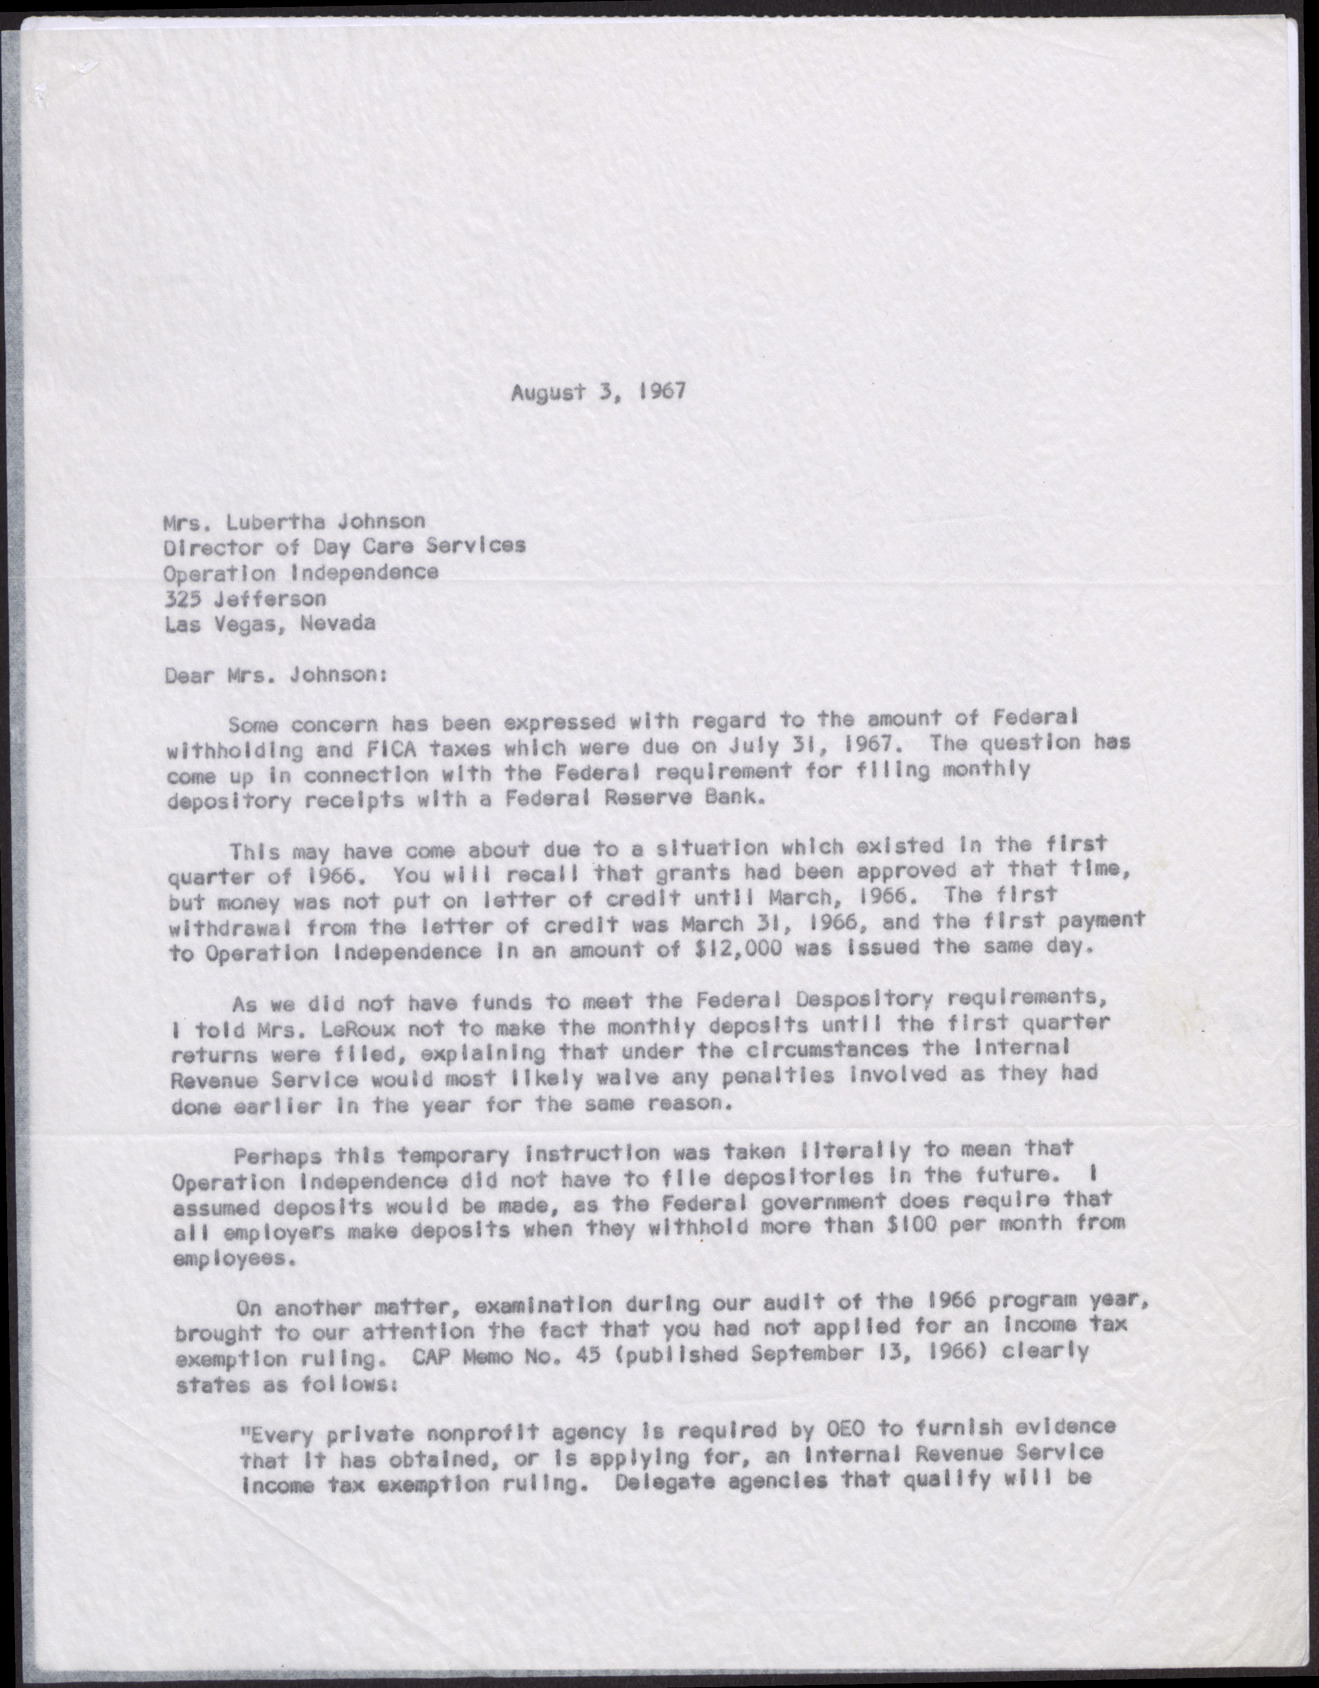 Letter to Mrs. Lubertha Johnson from Evelyn H. Maudlin (2 pages), August 3, 1967